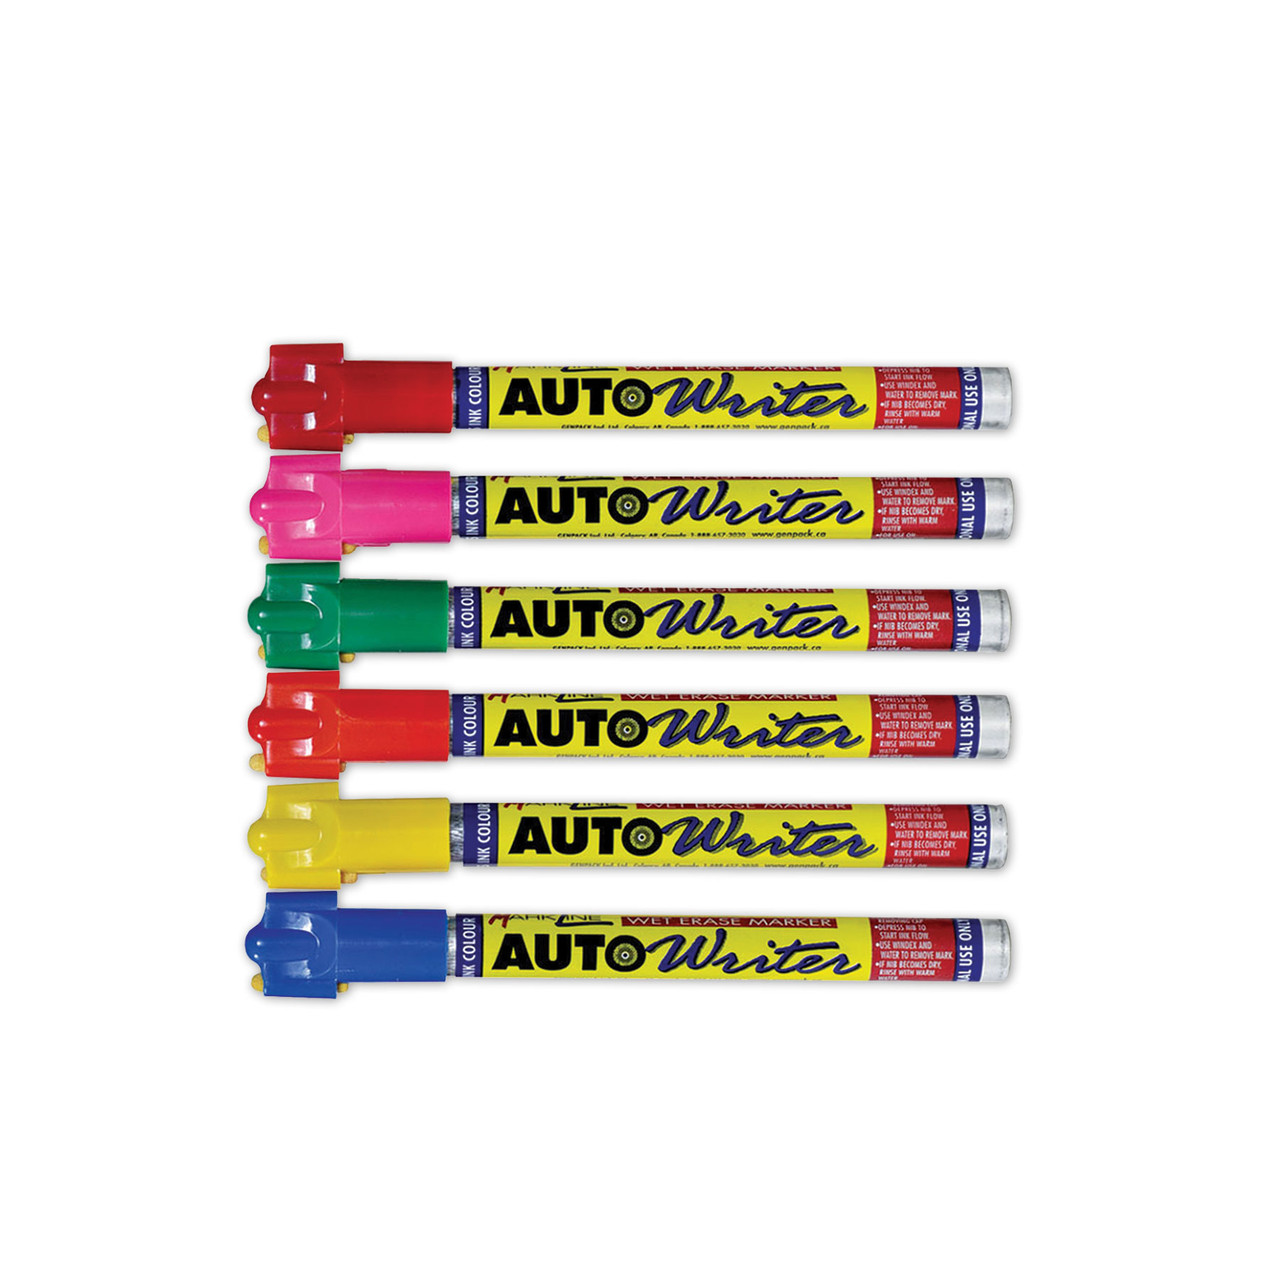 Windshield Markers From US Auto Supplies, car dealer windshield markers